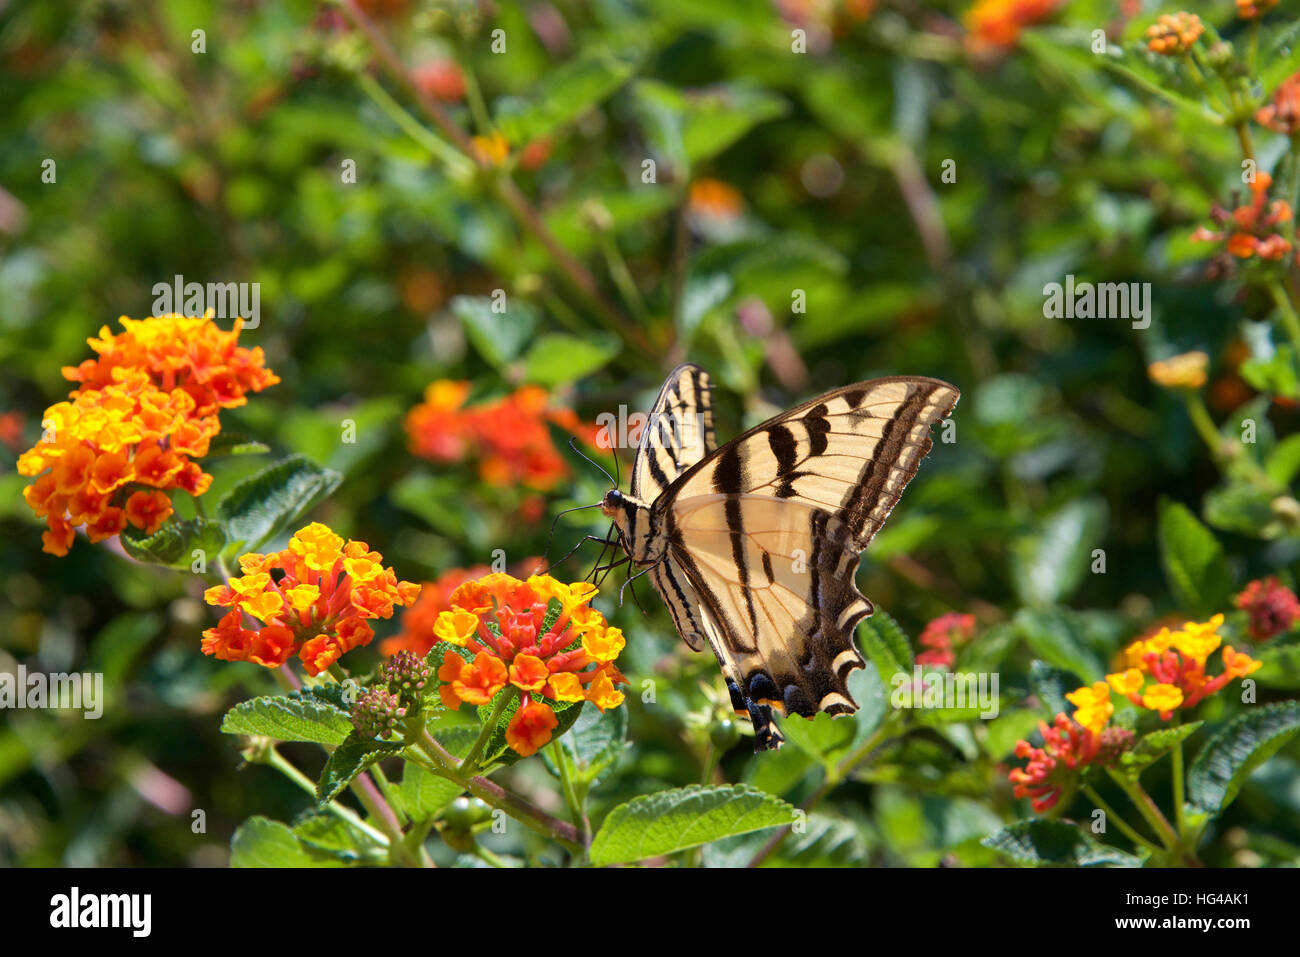 The Black Swallowtail butterfly, also called the American Swallowtail or Parsnip Swallowtail. Drinking nectar from orange and yellow Lantana flowers Stock Photo